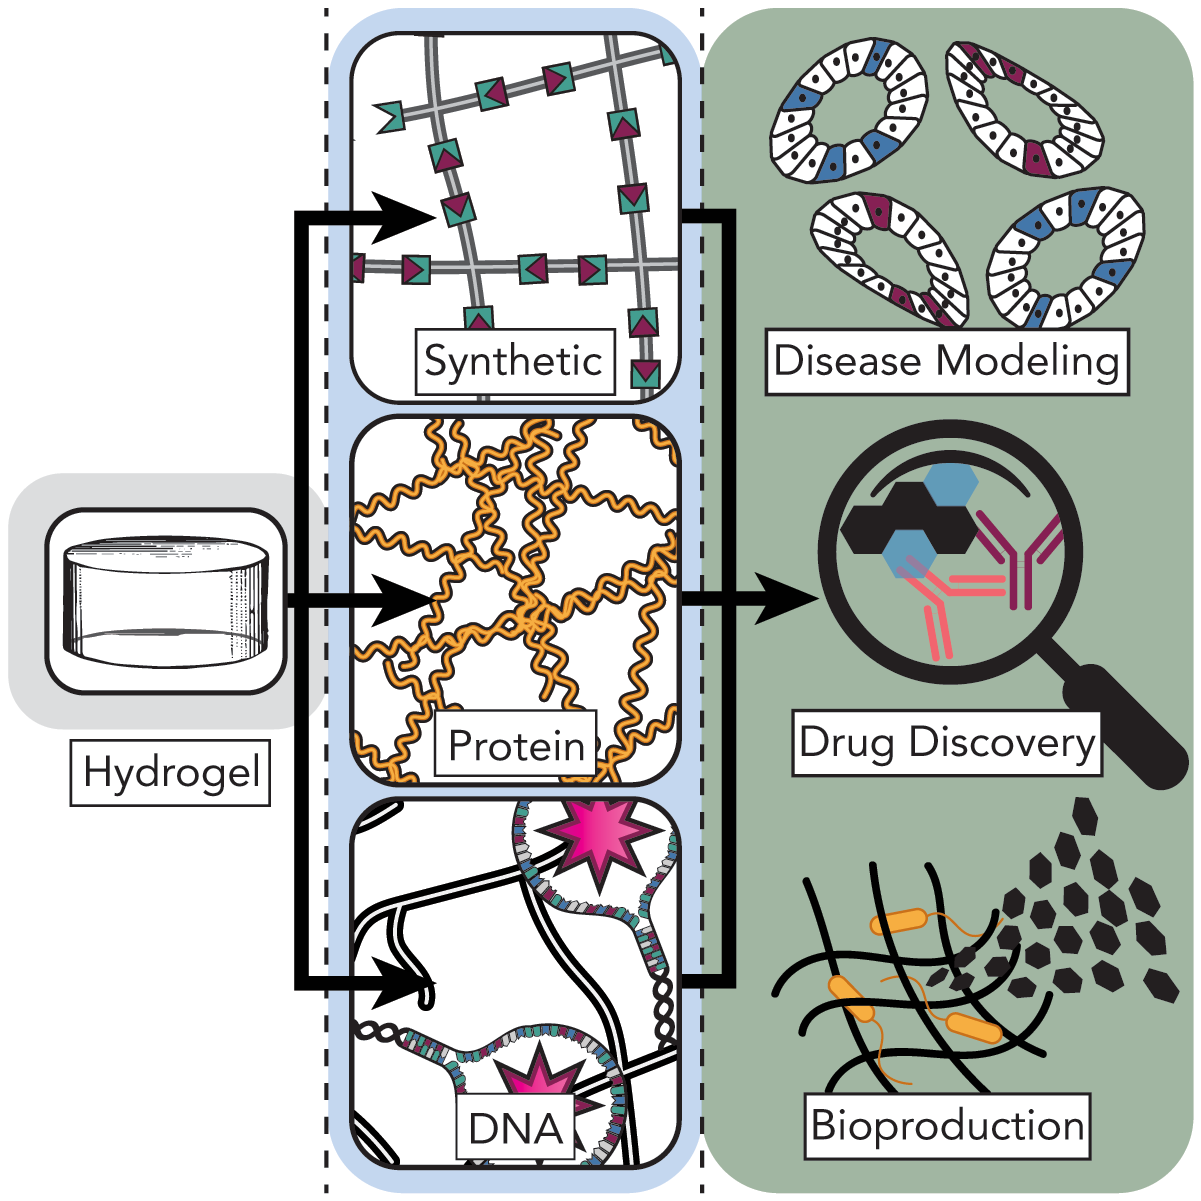 Chemical and Biological Engineering Strategies to Make and Modify Next-generation Hydrogel Biomaterials